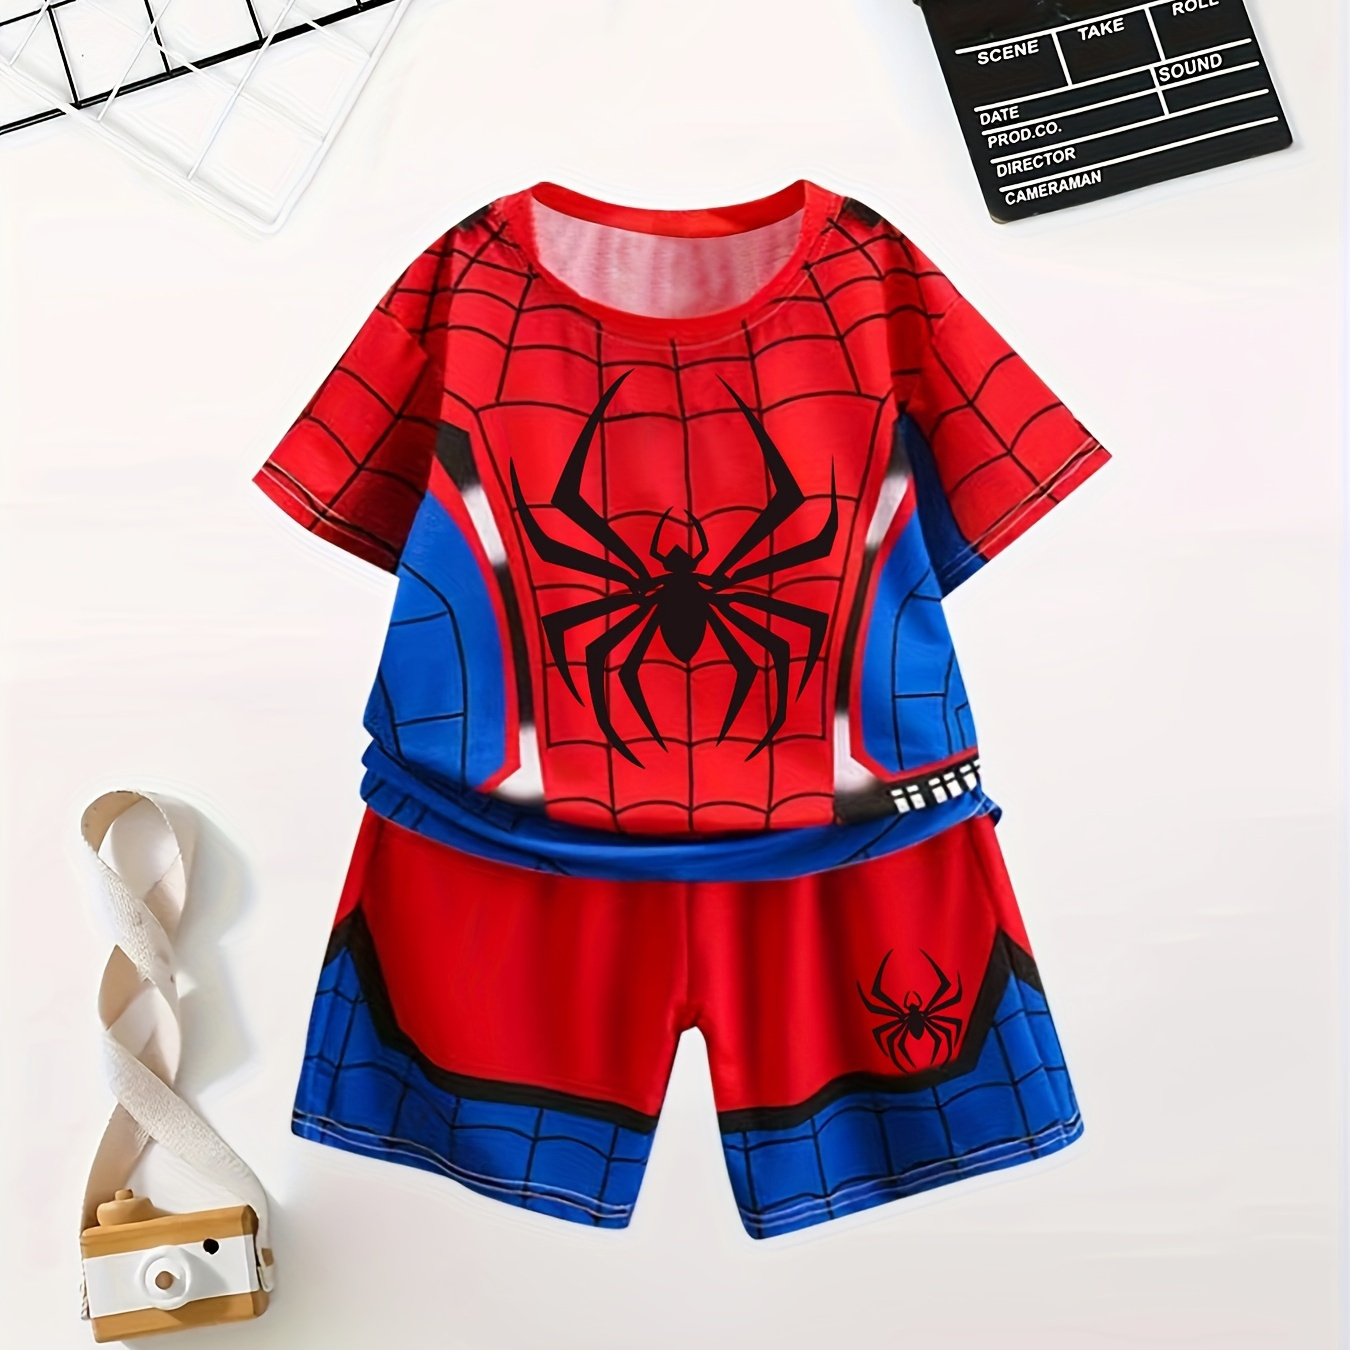 

Trendy Spider And Web Graphic Print, 2pcs Boys Casual Short Sleeve T-shirt & Shorts Set, Boys Clothing For Summer, As Gifts